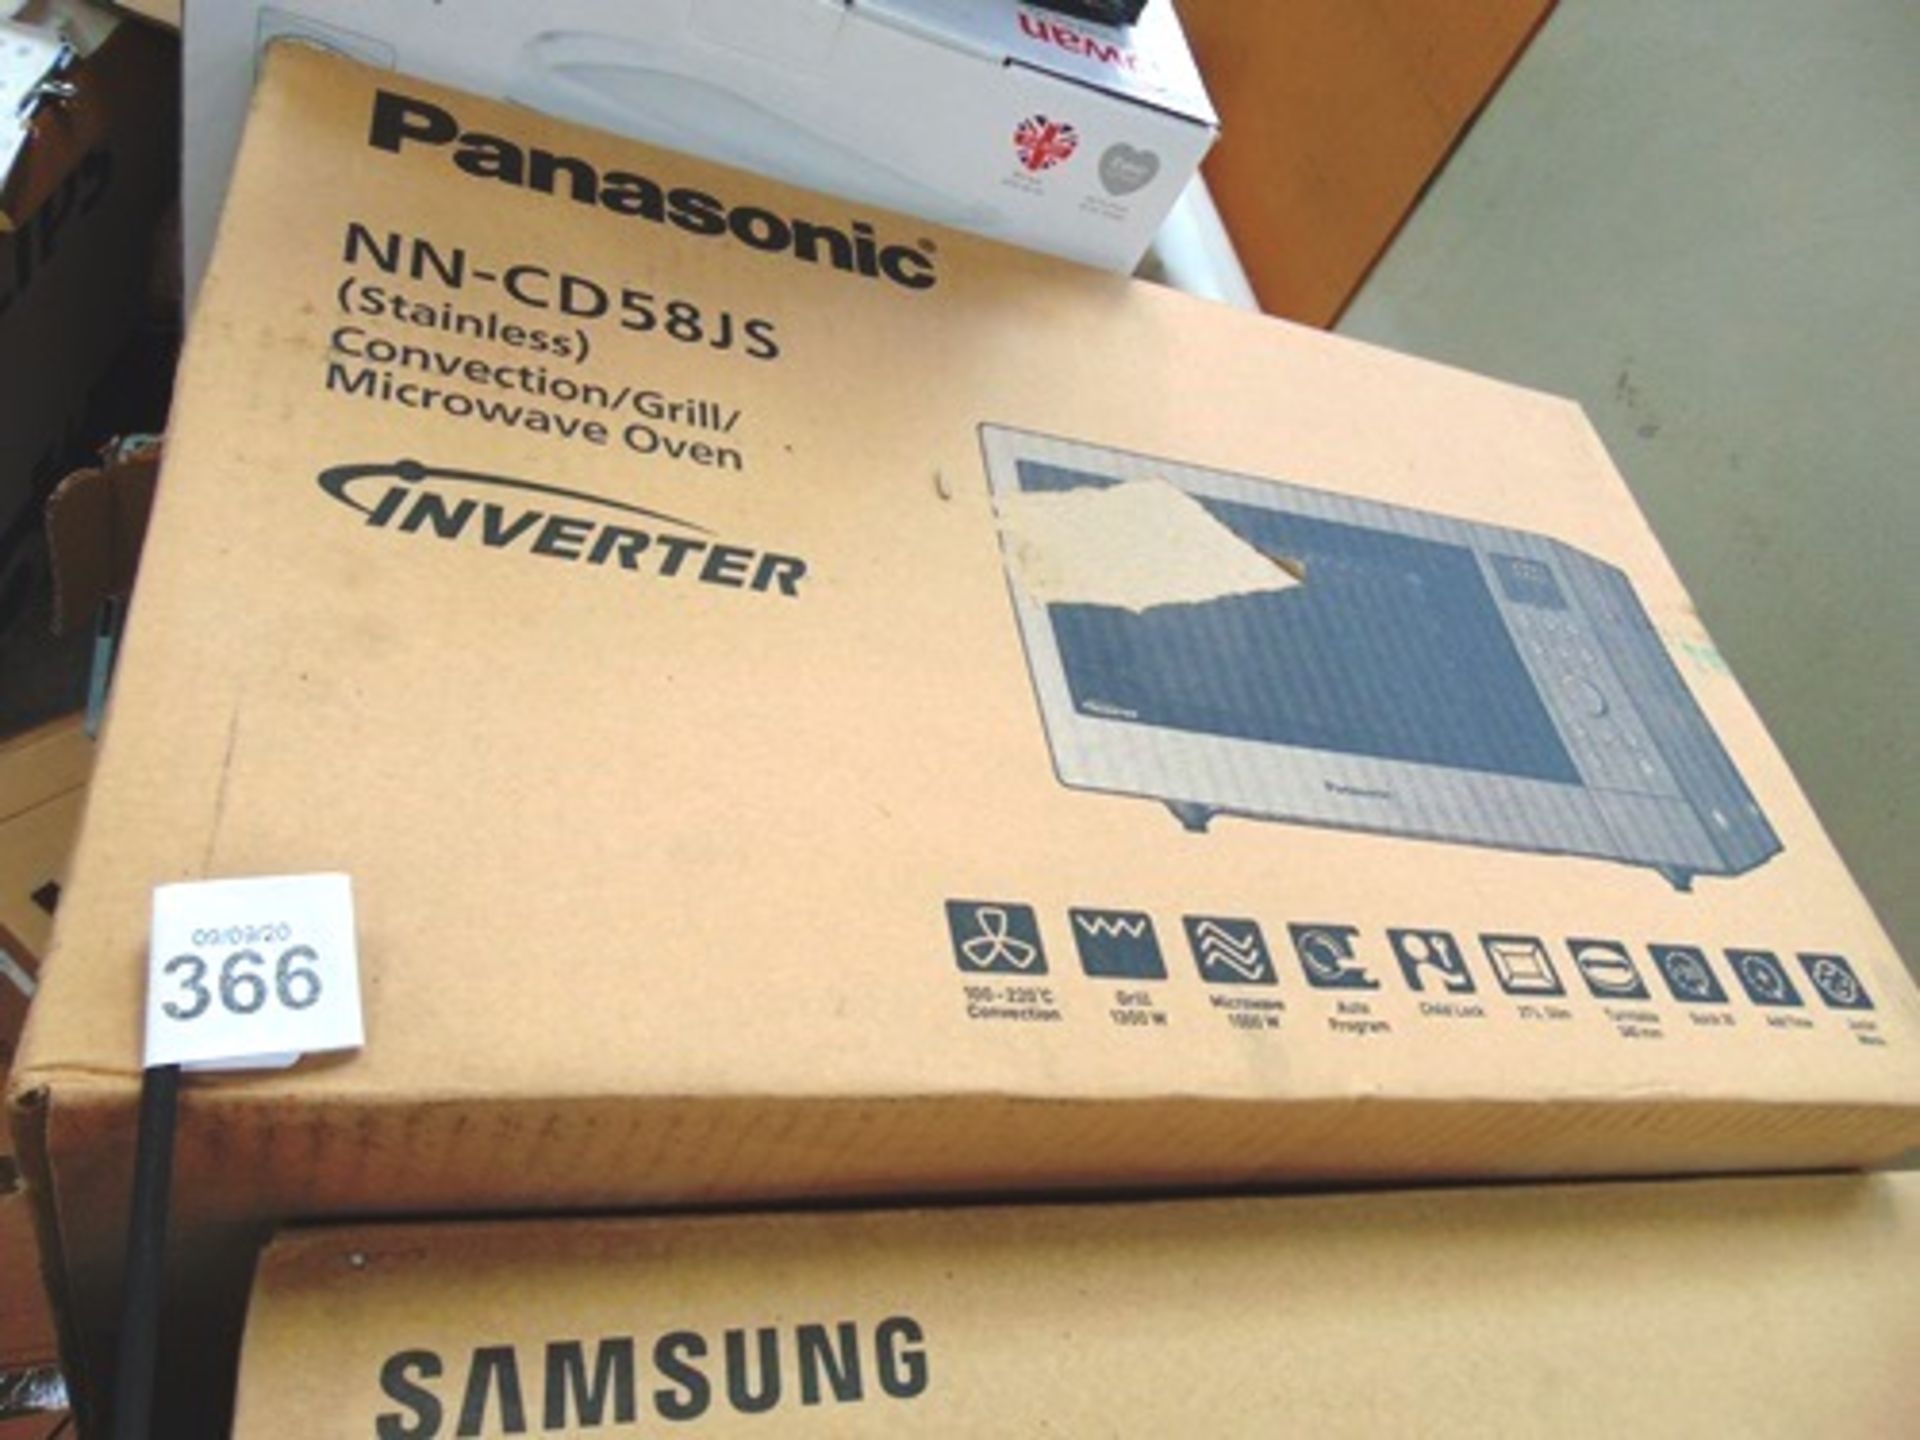 Panasonic inverter microwave/grill oven, 100W, 27ltr, NN-CD58JS - Sealed new in box (ES1A)